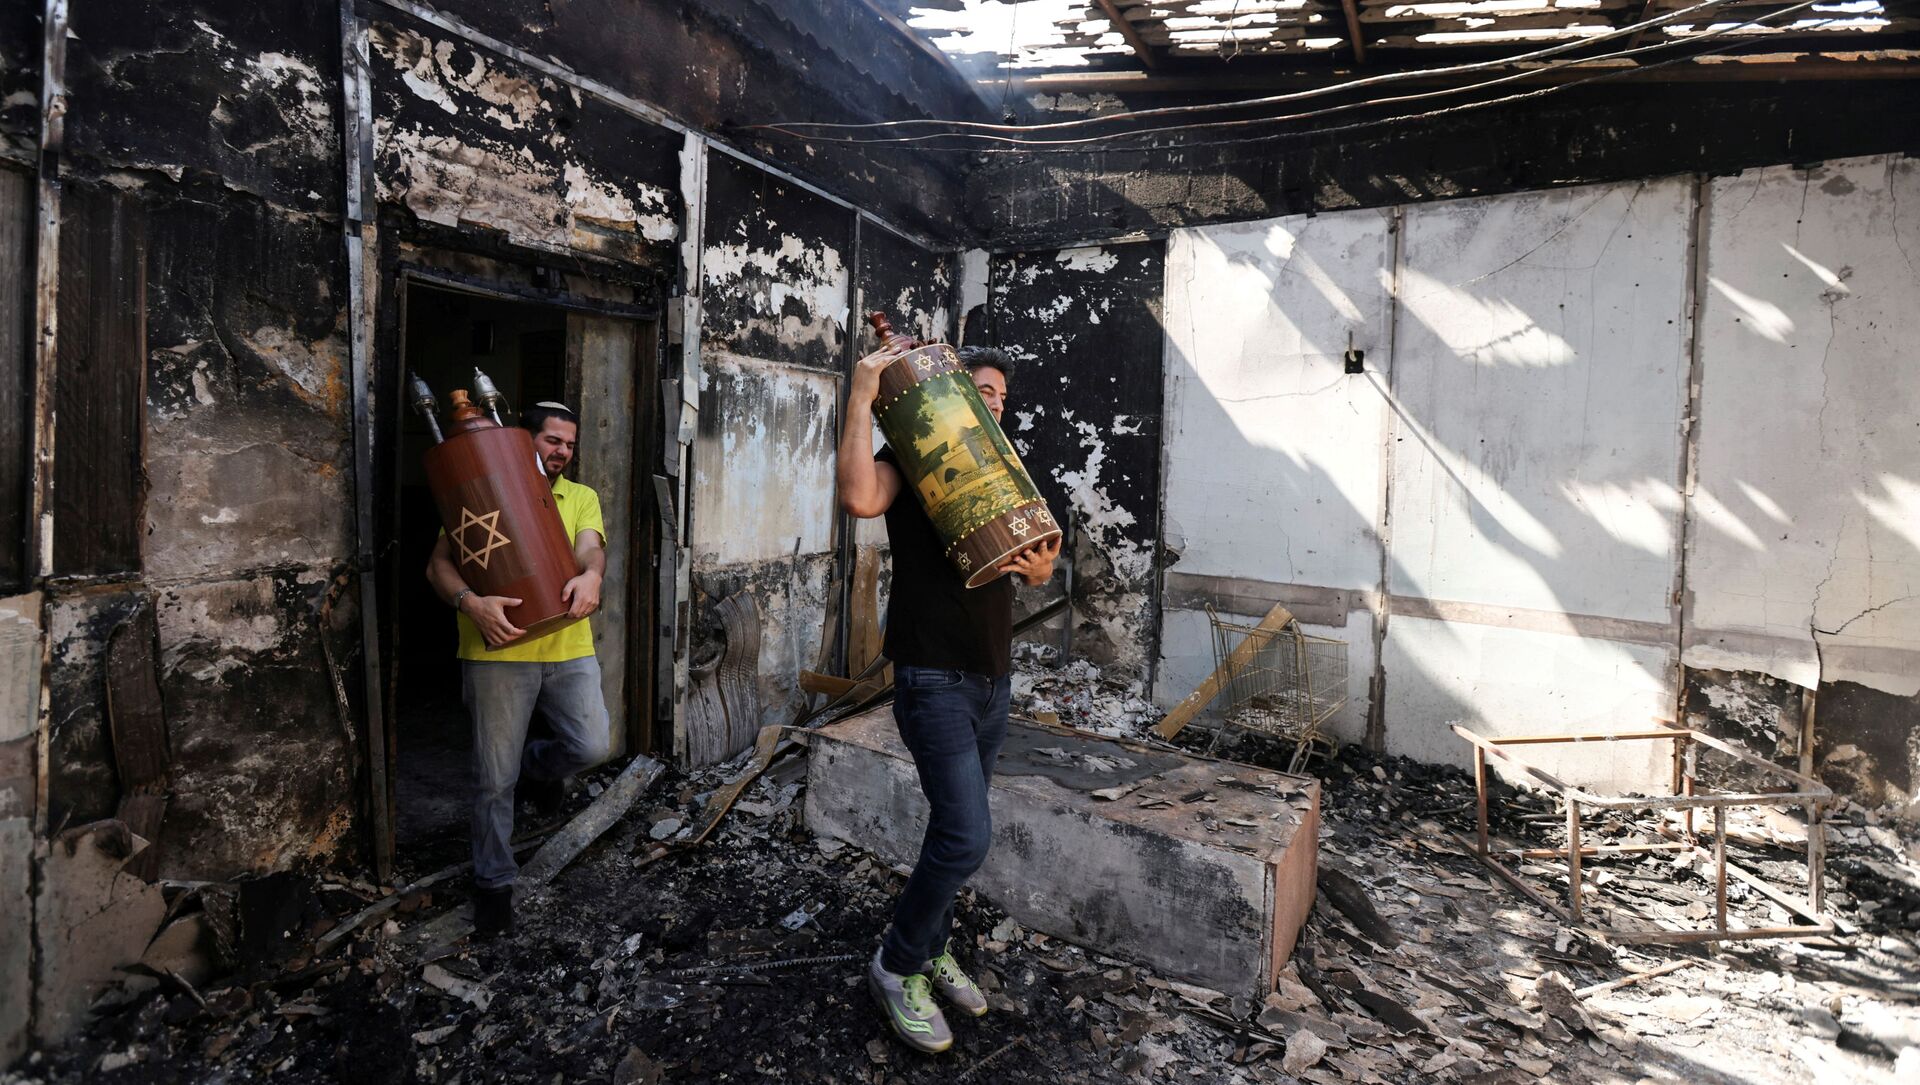 Torah scrolls, Jewish holy scriptures, are removed from a synagogue which was torched during violent confrontations in the city of Lod, Israel between Israeli Arab demonstrators and police, amid high tensions over hostilities between Israel and Gaza militants and tensions in Jerusalem May 12, 2021 - Sputnik International, 1920, 12.05.2021